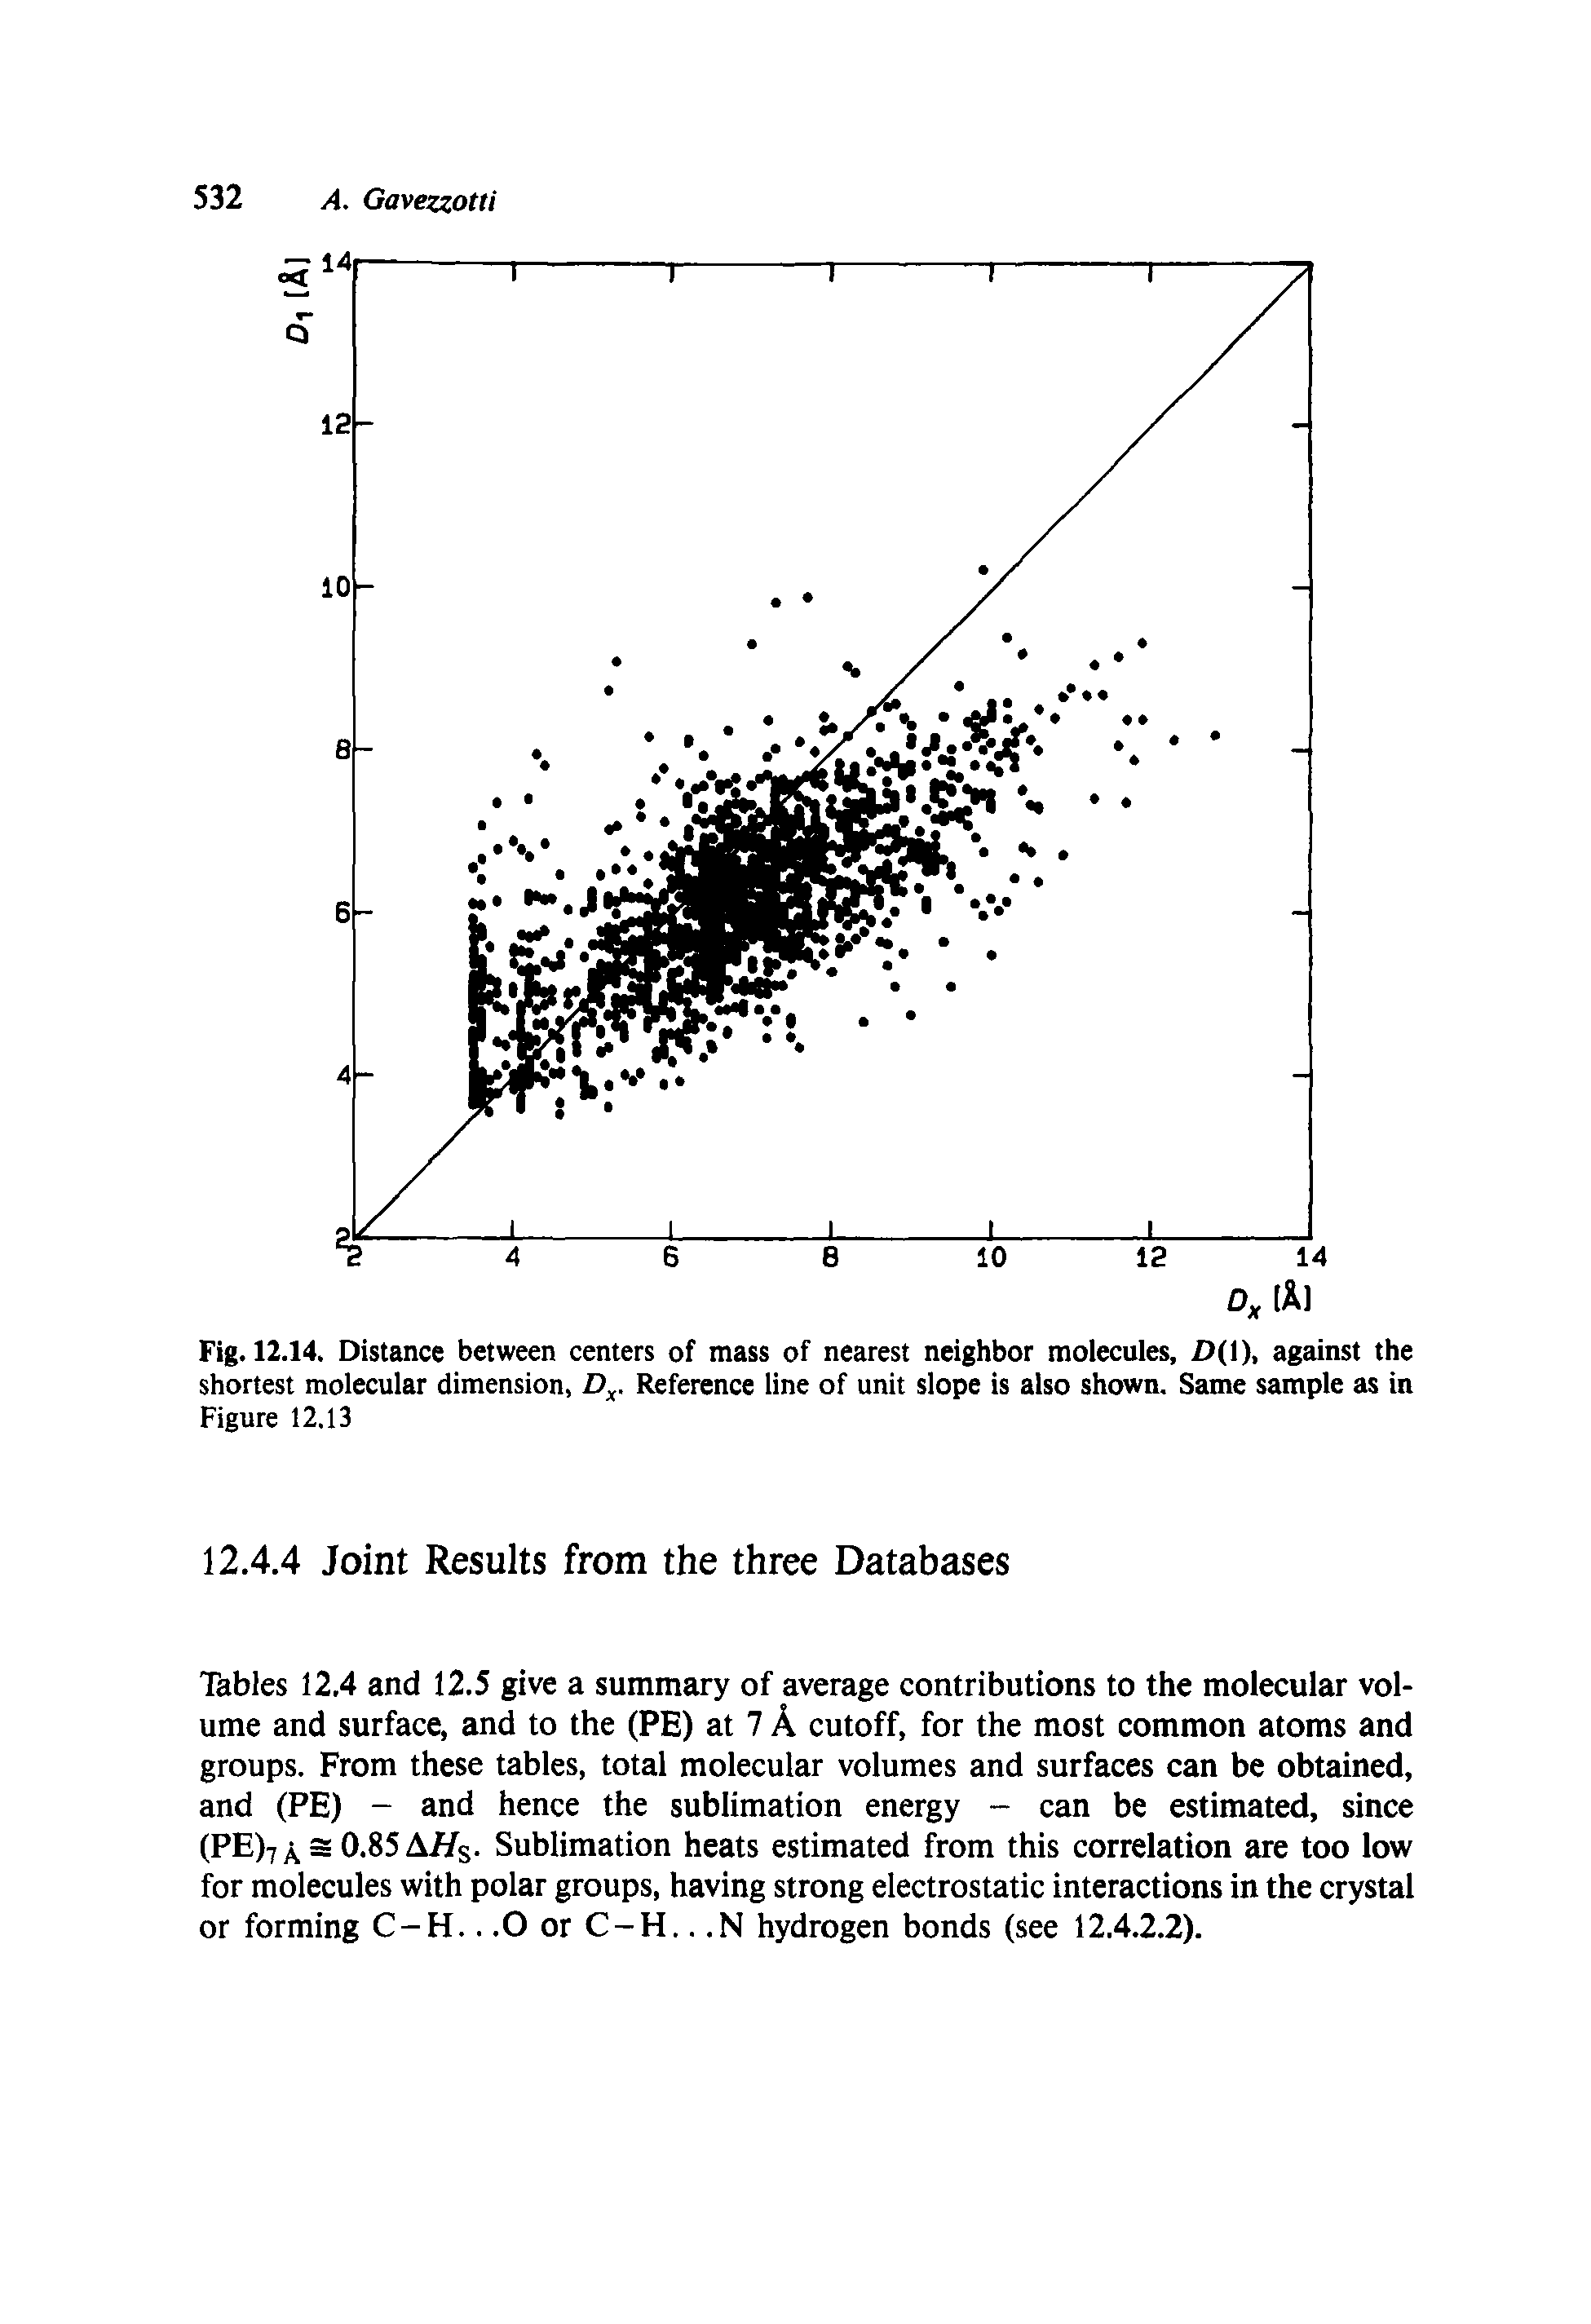 Tables 12.4 and 12.5 give a summary of average contributions to the molecular volume and surface, and to the (PE) at 7 A cutoff, for the most common atoms and groups. From these tables, total molecular volumes and surfaces can be obtained, and (PE) - and hence the sublimation energy - can be estimated, since (PE)7a s 0.85 Ai/s- Sublimation heats estimated from this correlation are too low for molecules with polar groups, having strong electrostatic interactions in the crystal or forming C-H...OorC-H...N hydrogen bonds (see 12.4.2.2).